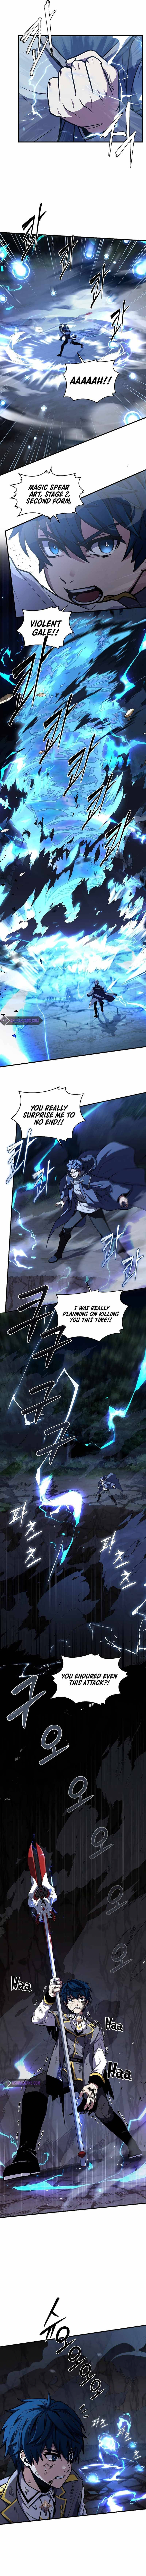 Return of the Legendary Spear Knight Chapter 41 page 6